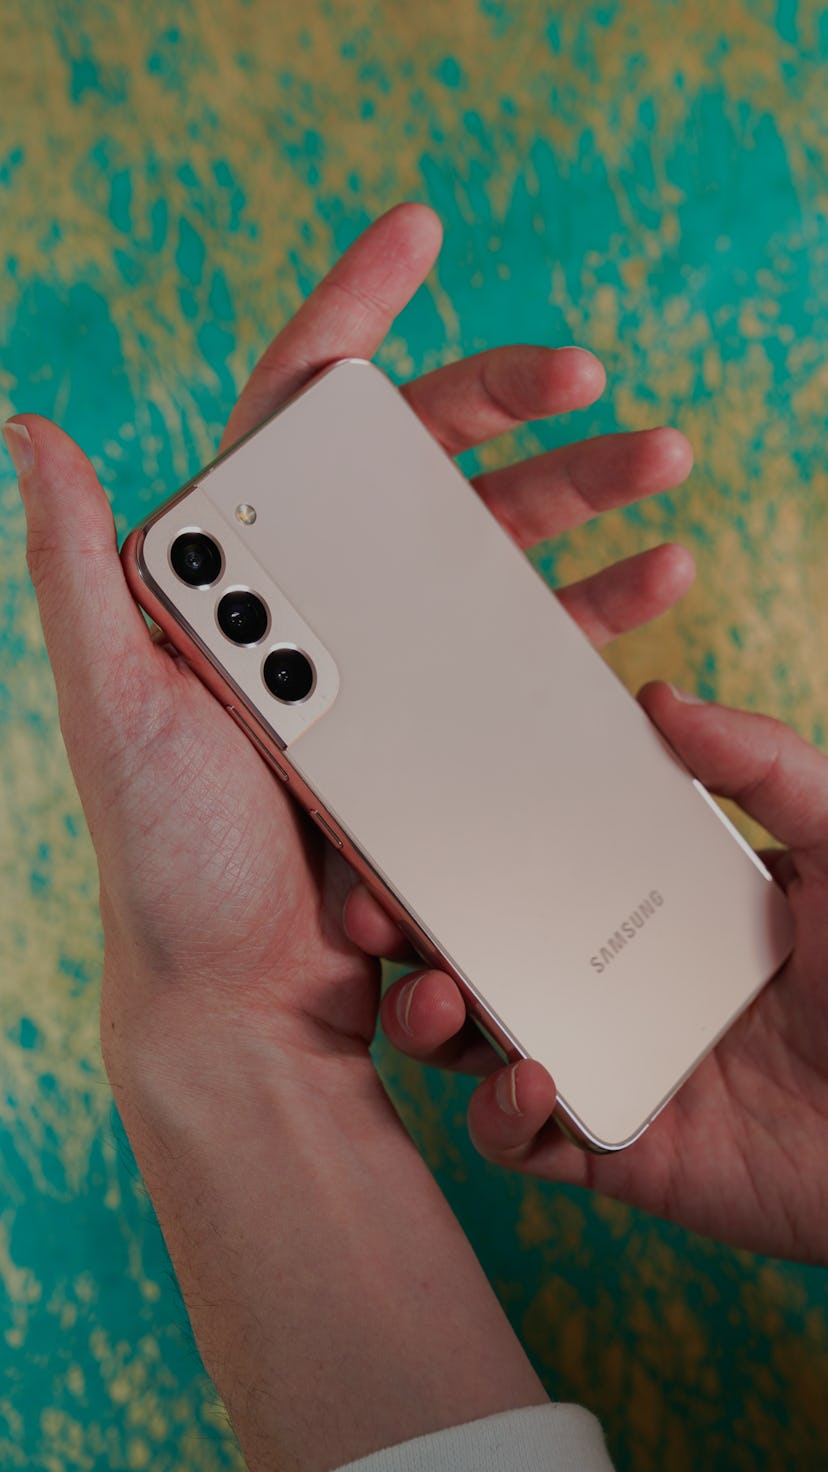 S22+ vs. Pixel 6 vs. iPhone 11: Which phone takes better portrait photos?